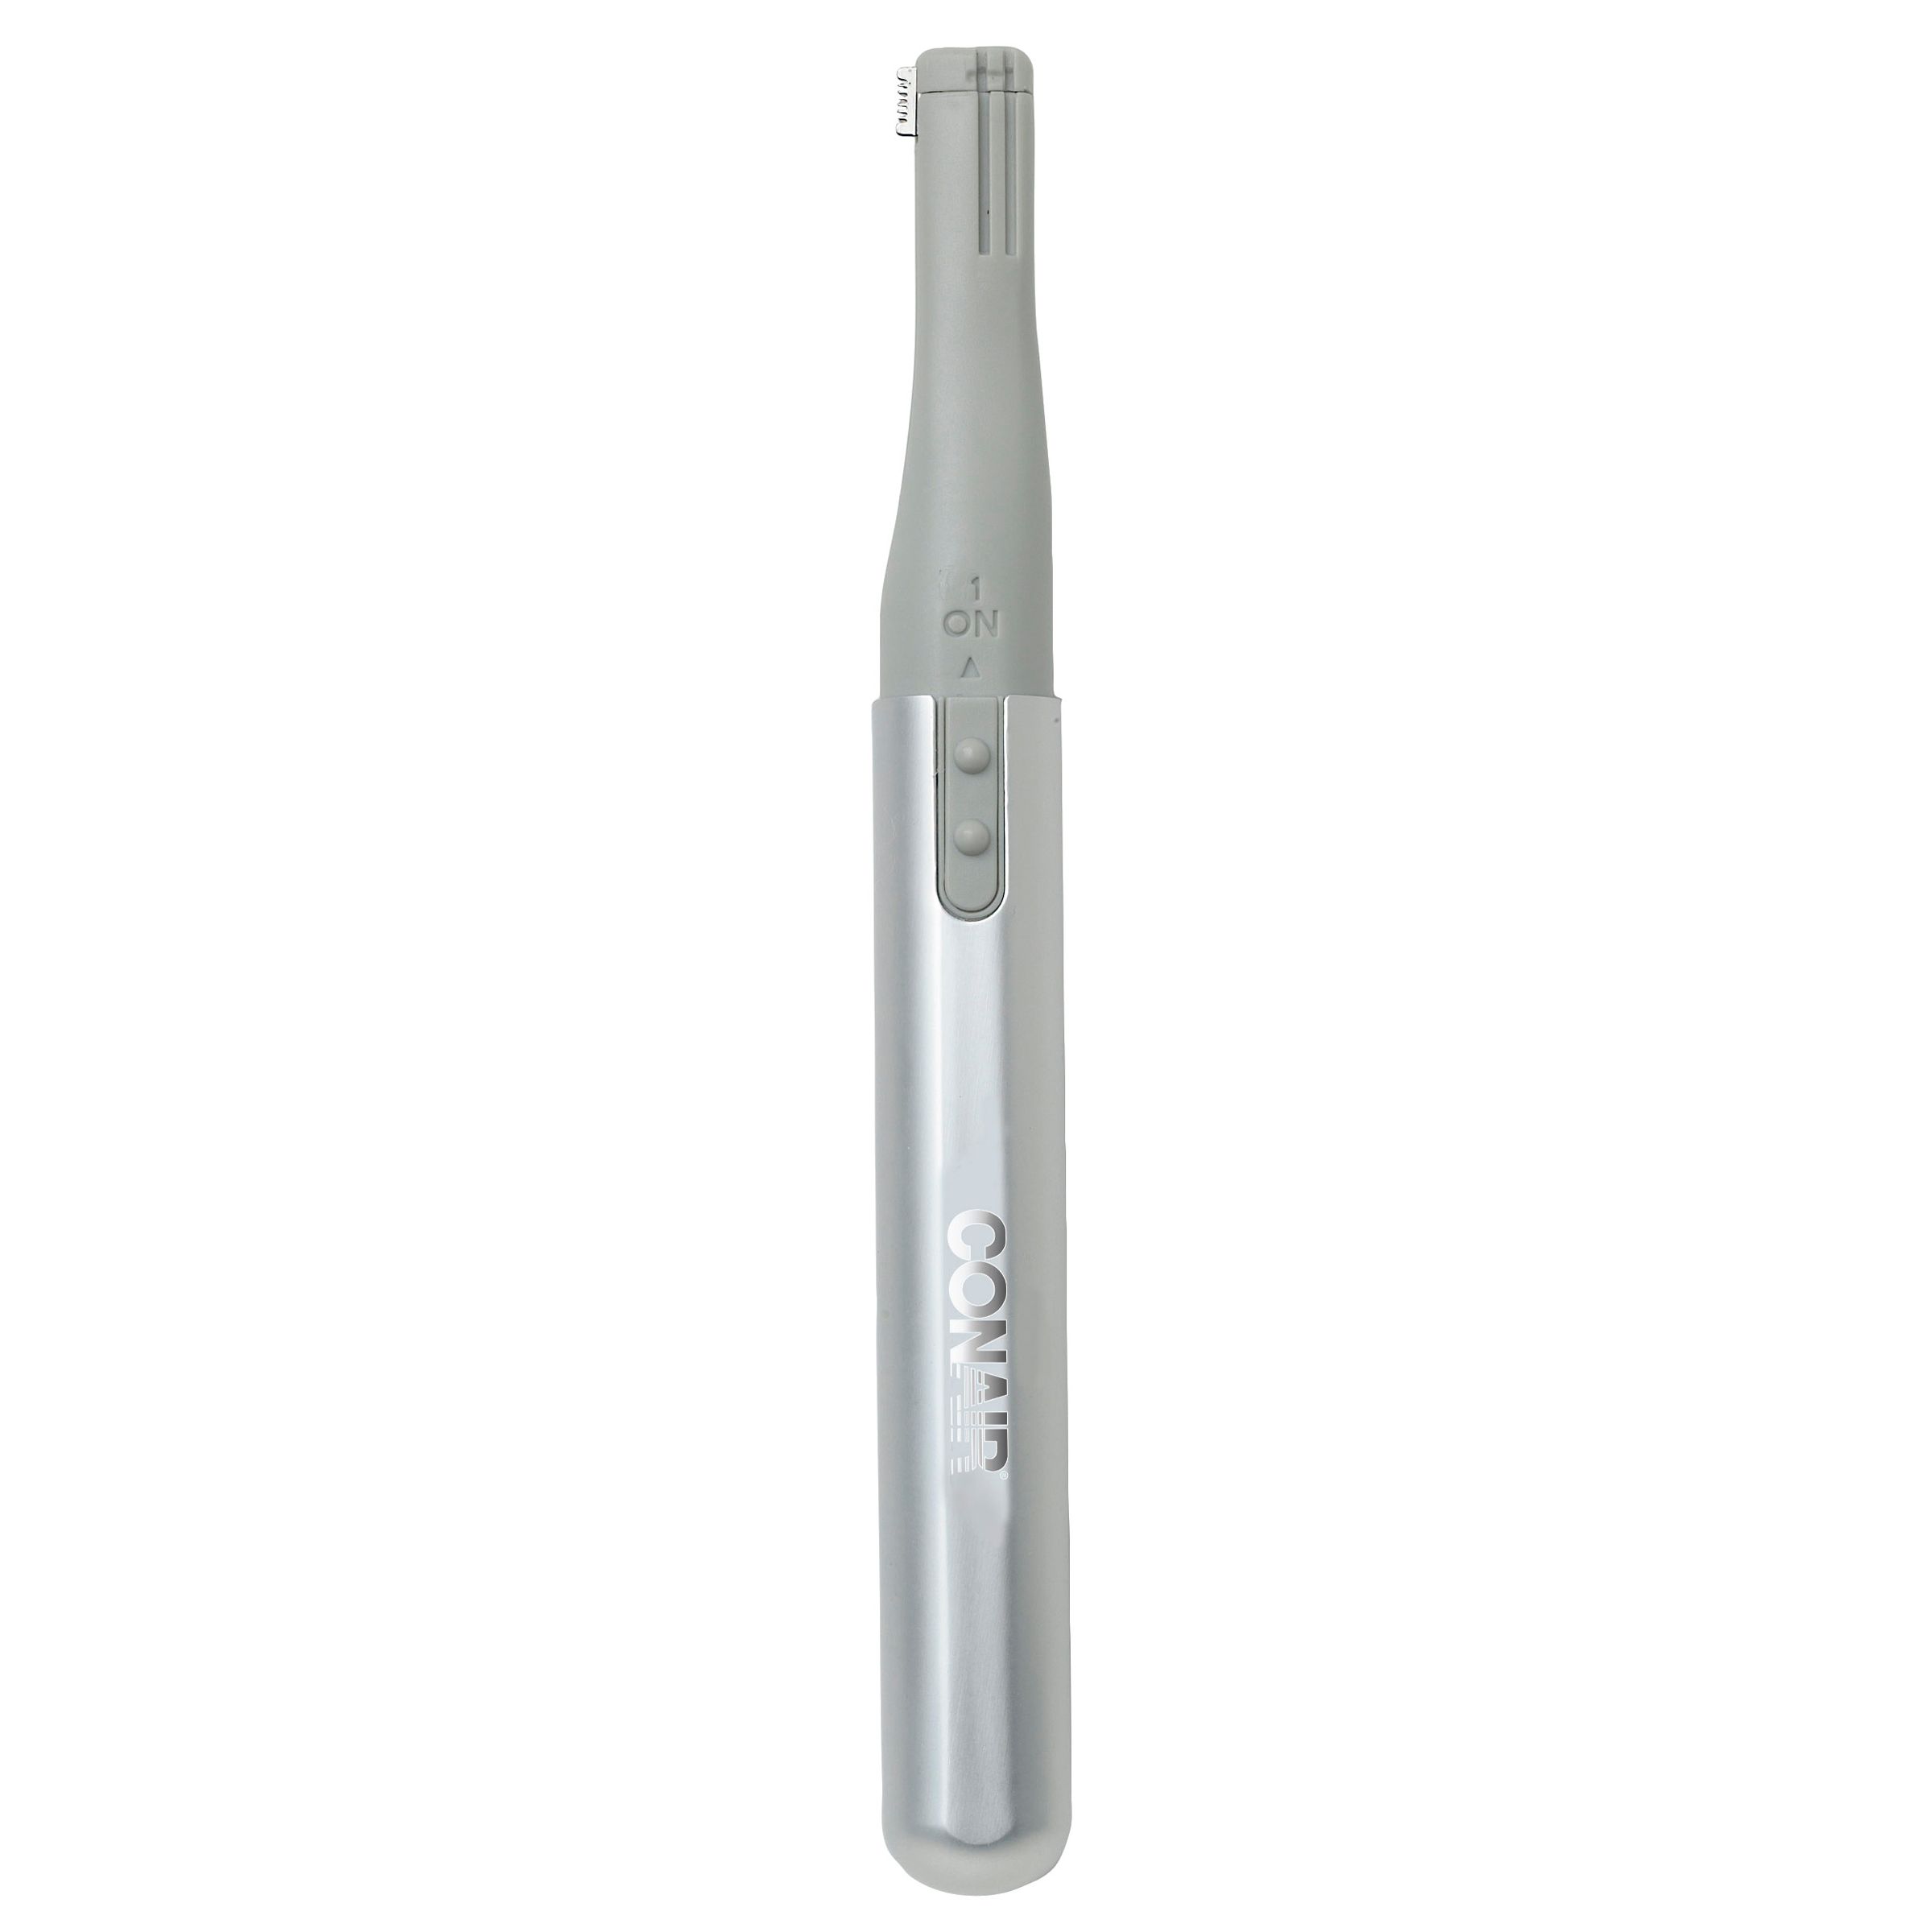 conair personal trimmer